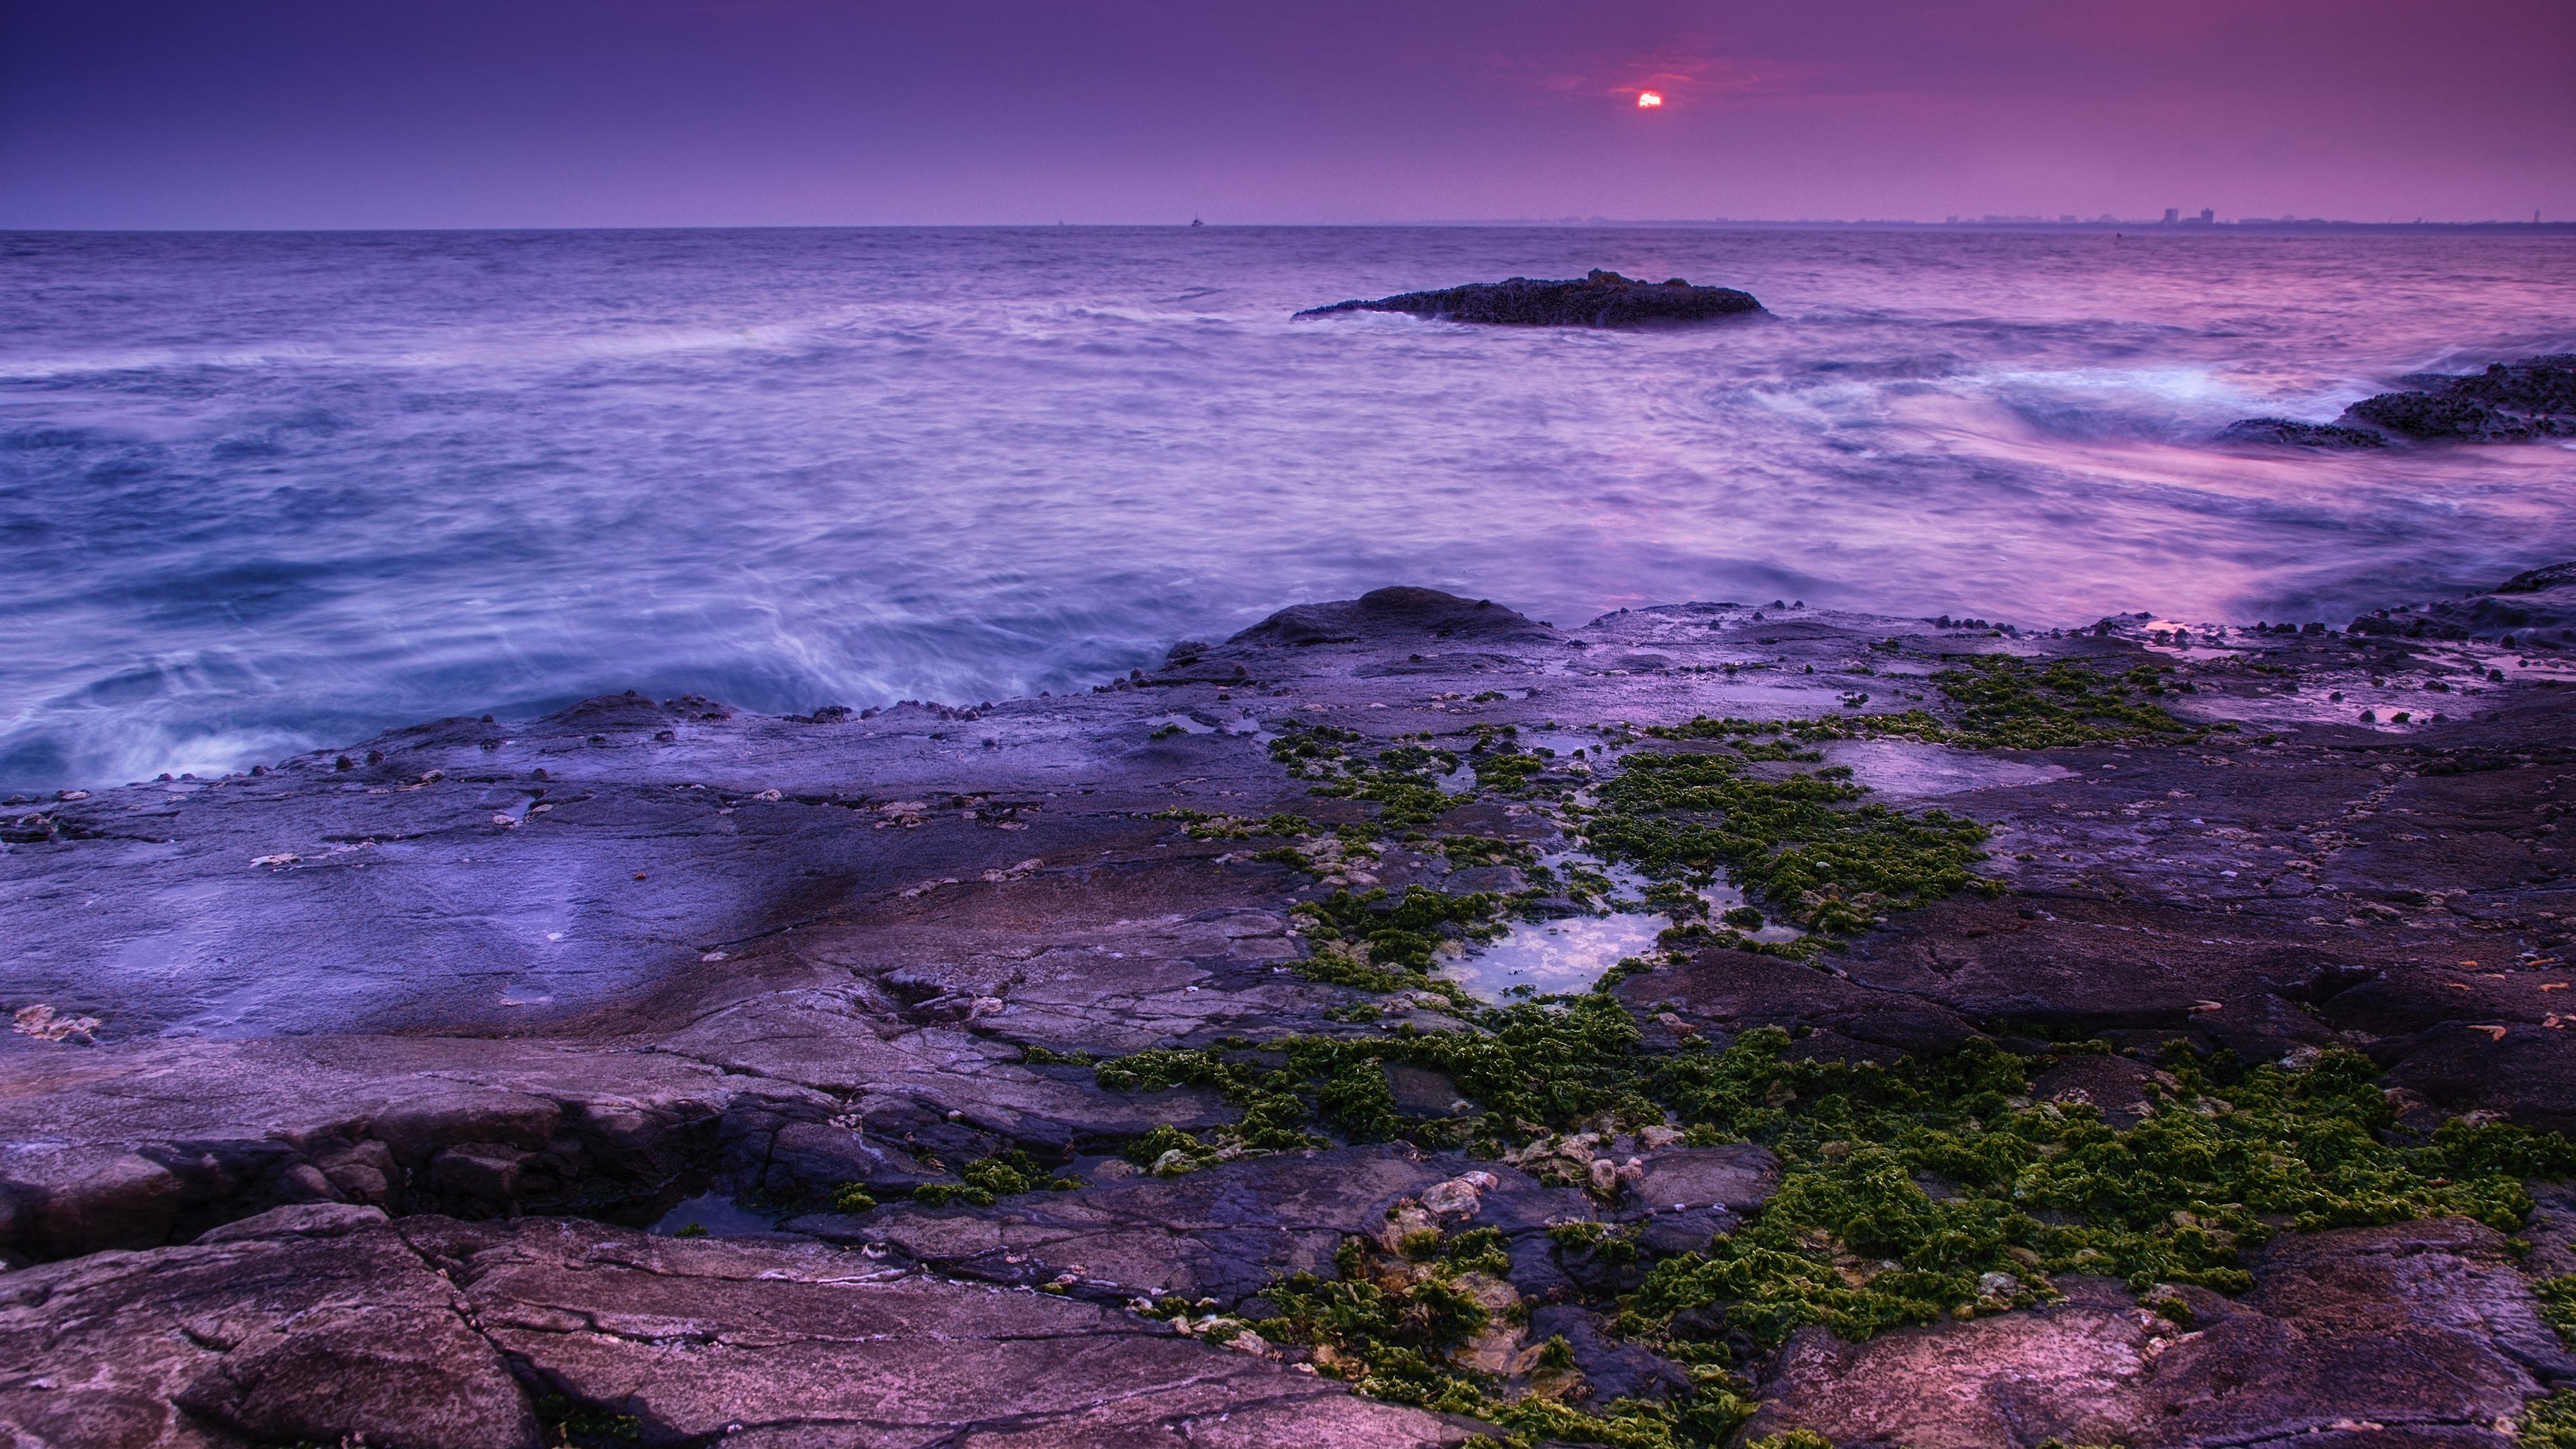 A rocky shore with water and the sun setting - Sunset